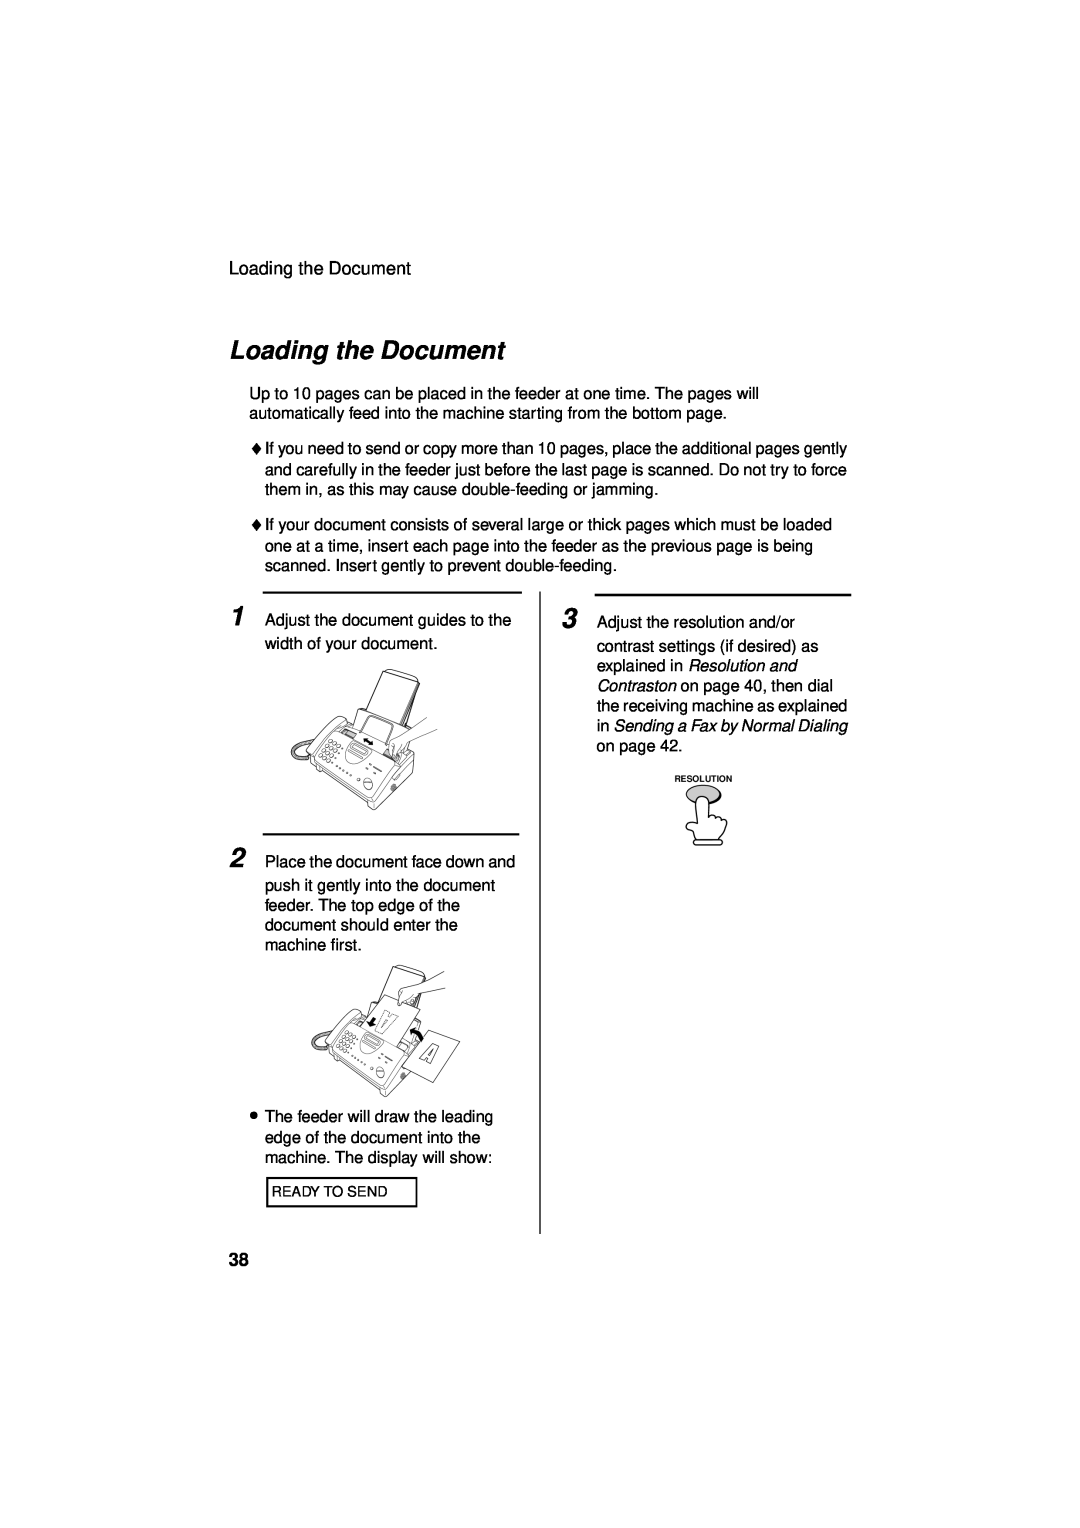 Sharp UX-340LM manual Loading the Document 